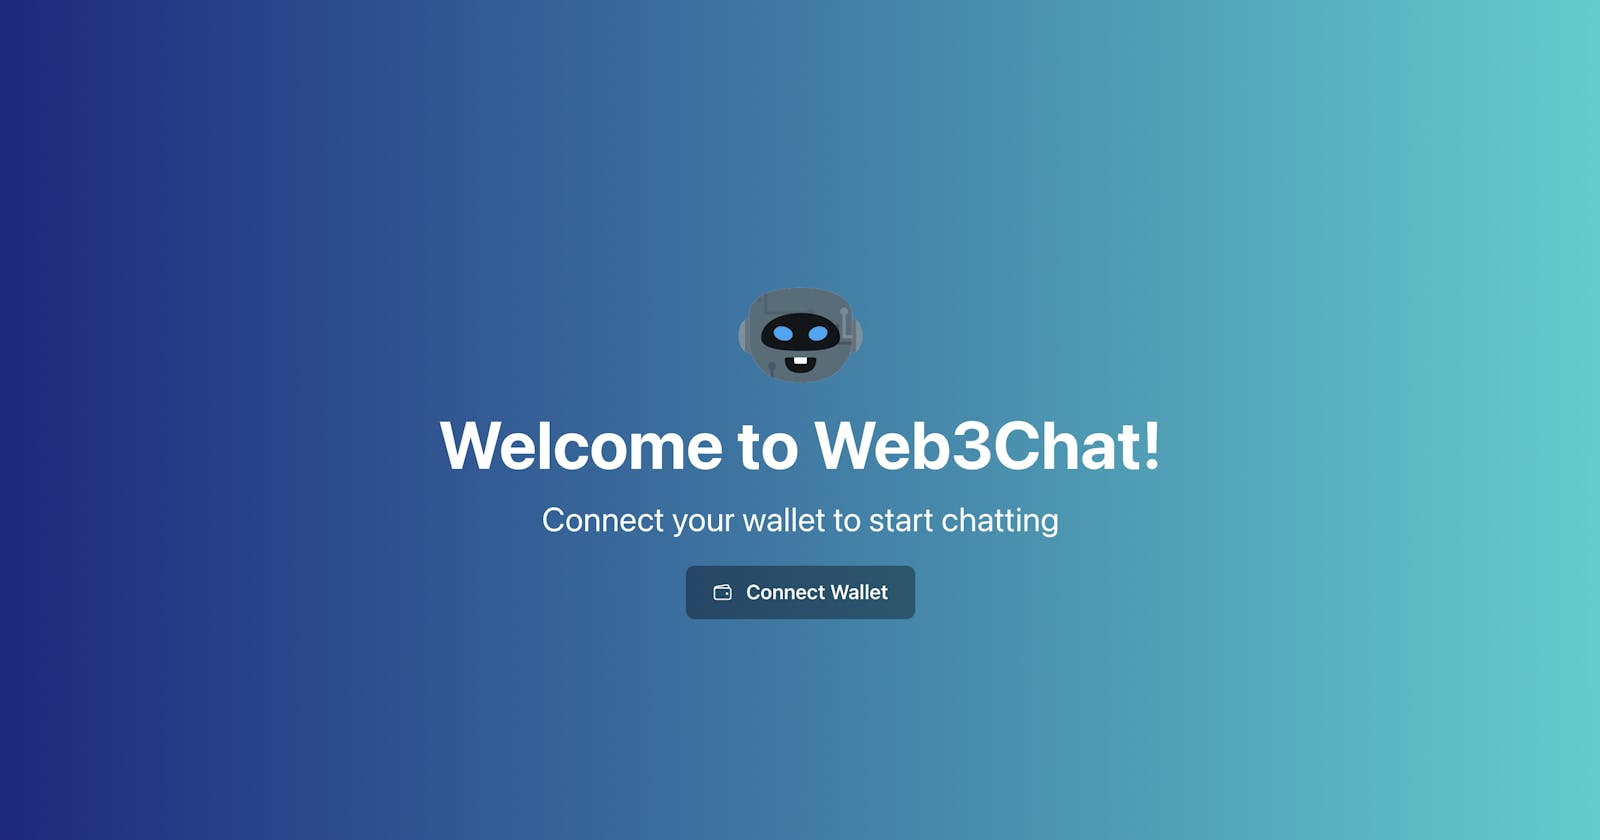 Introducing Web3Chat - A decentralized chat app!